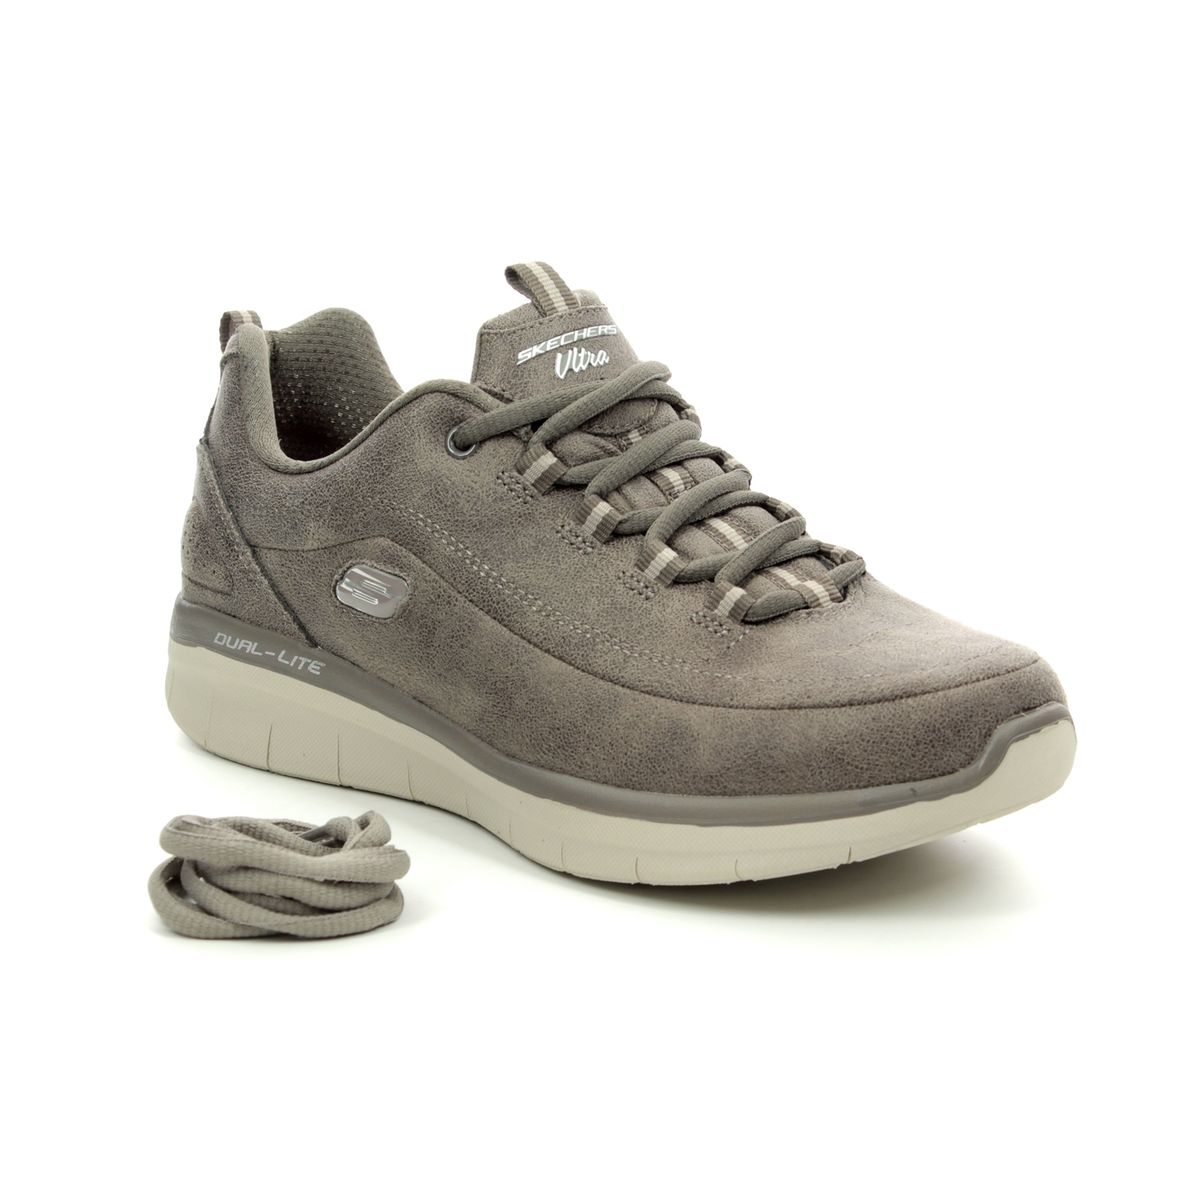 Skechers Synergy 2.0 12934 DKTP Dark Taupe trainers